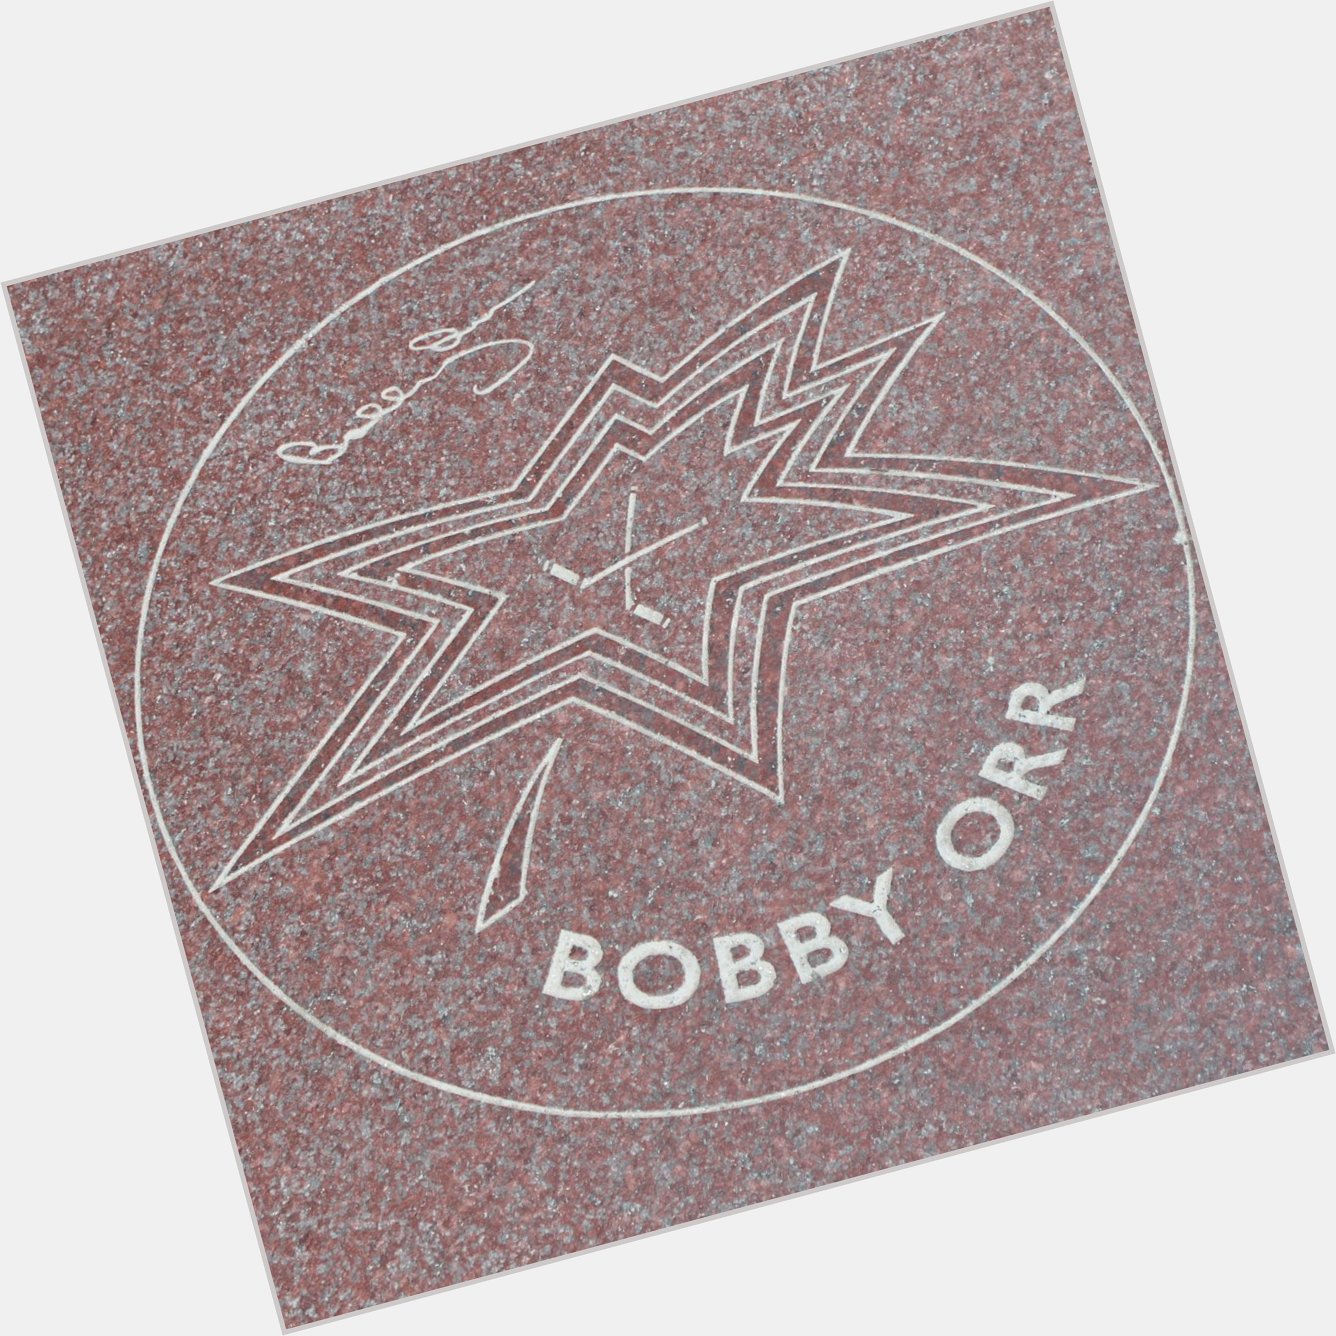 Happy birthday to 1998 Canada\s Walk of Fame Inductee Bobby Orr! 